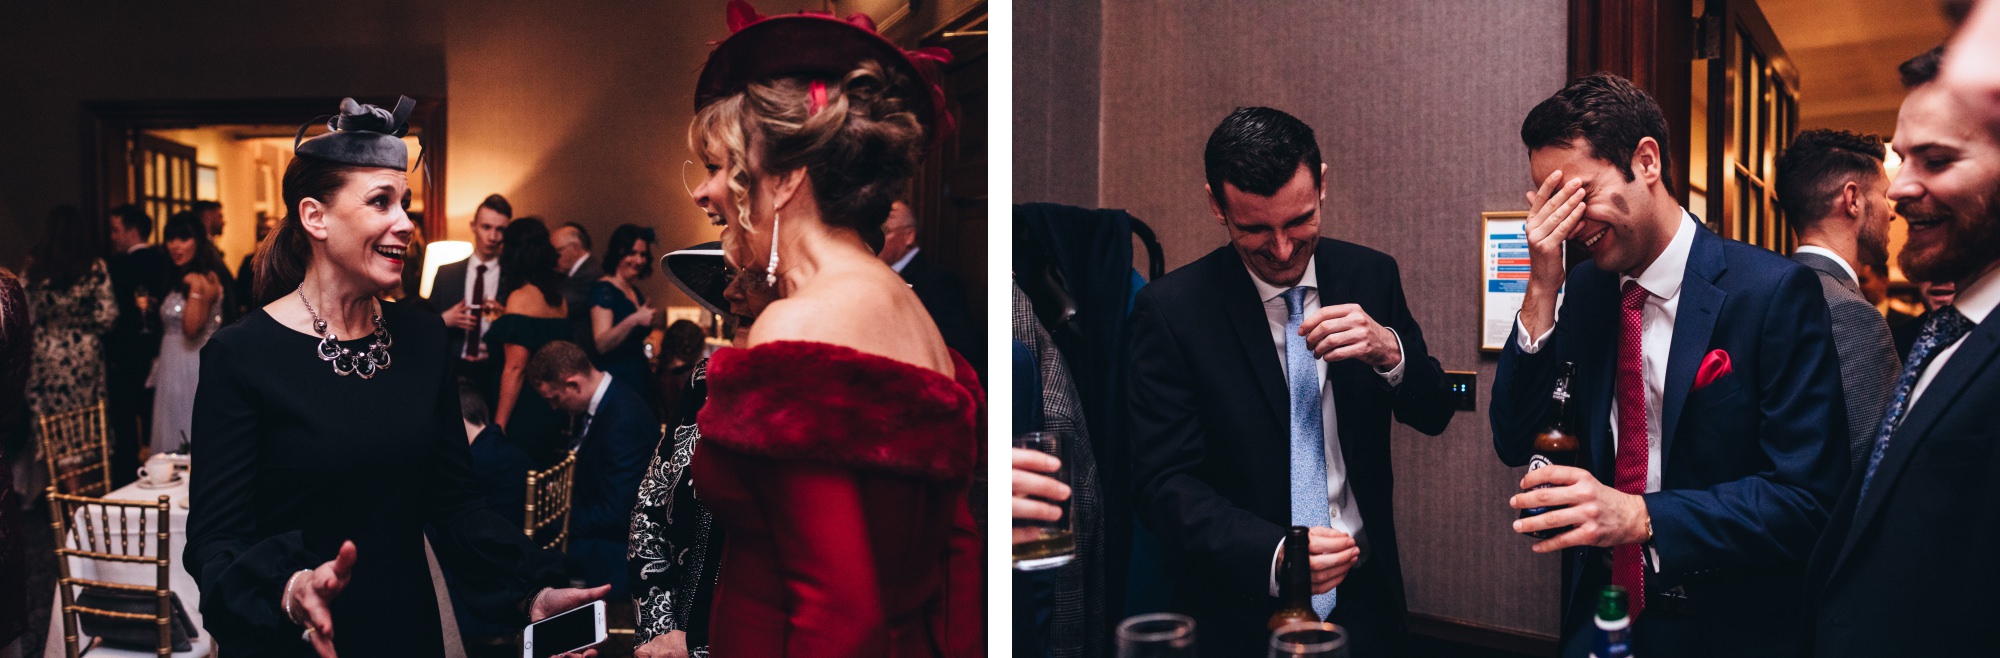 candid moments of wedding guests